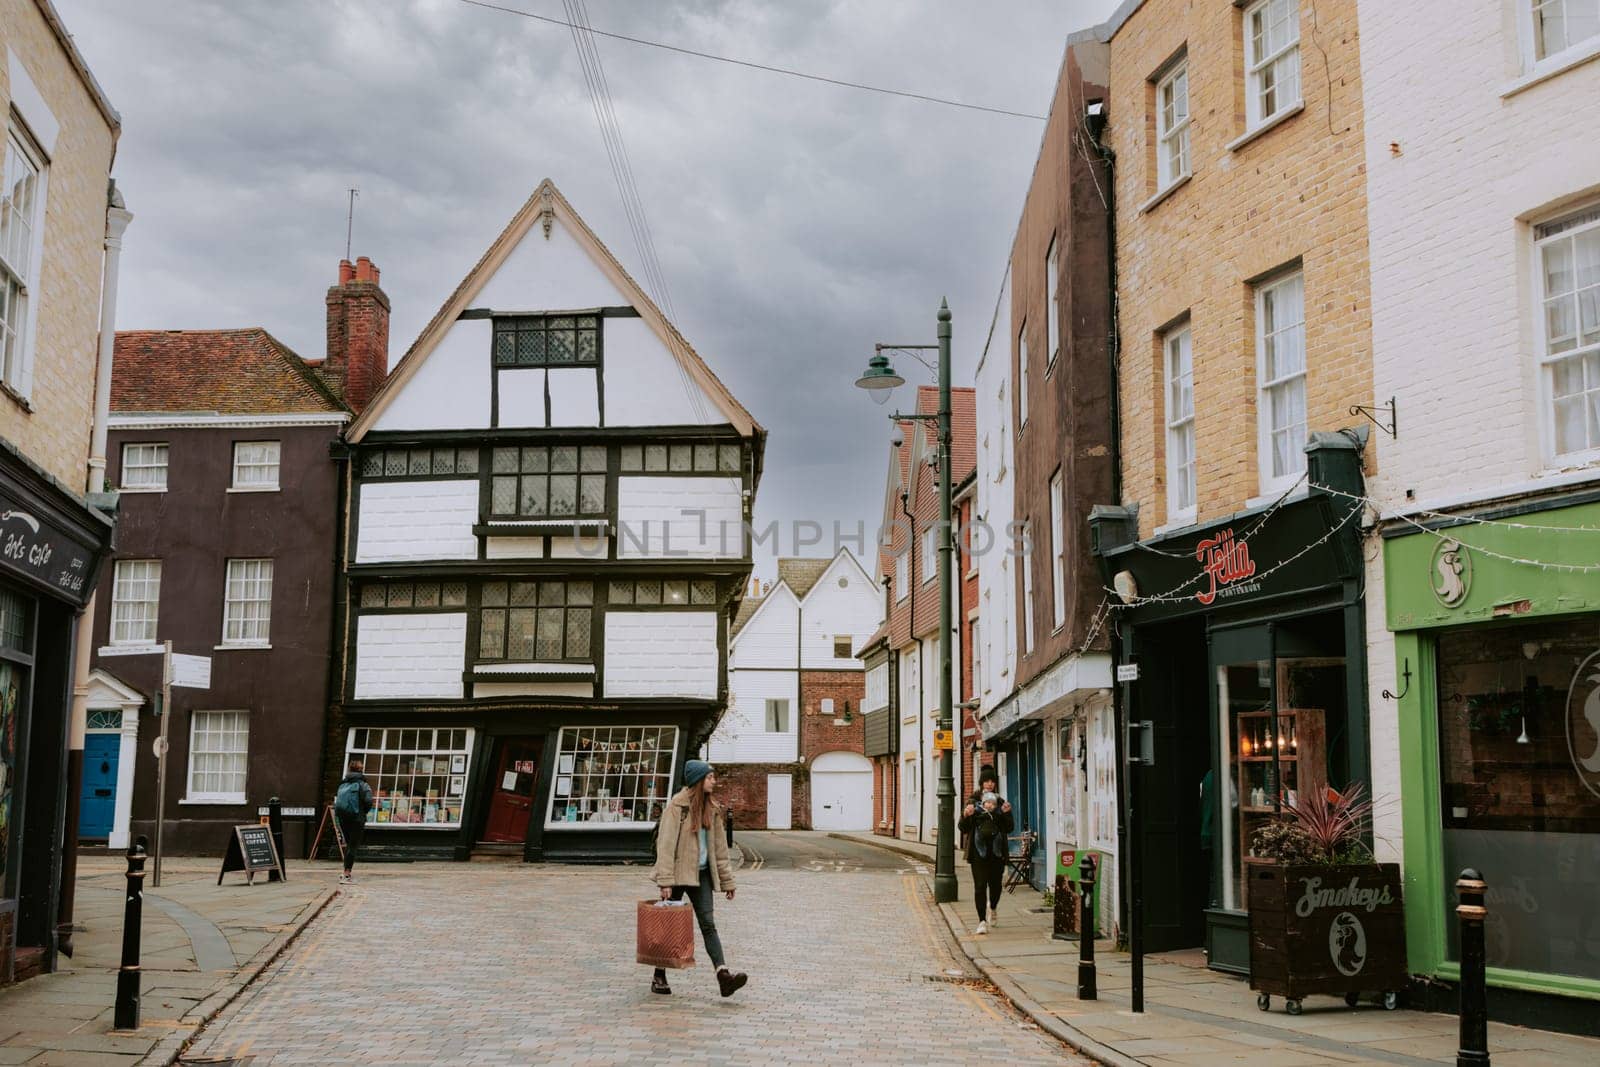 The crooked house in Canterbury, United Kingdom by Suteren